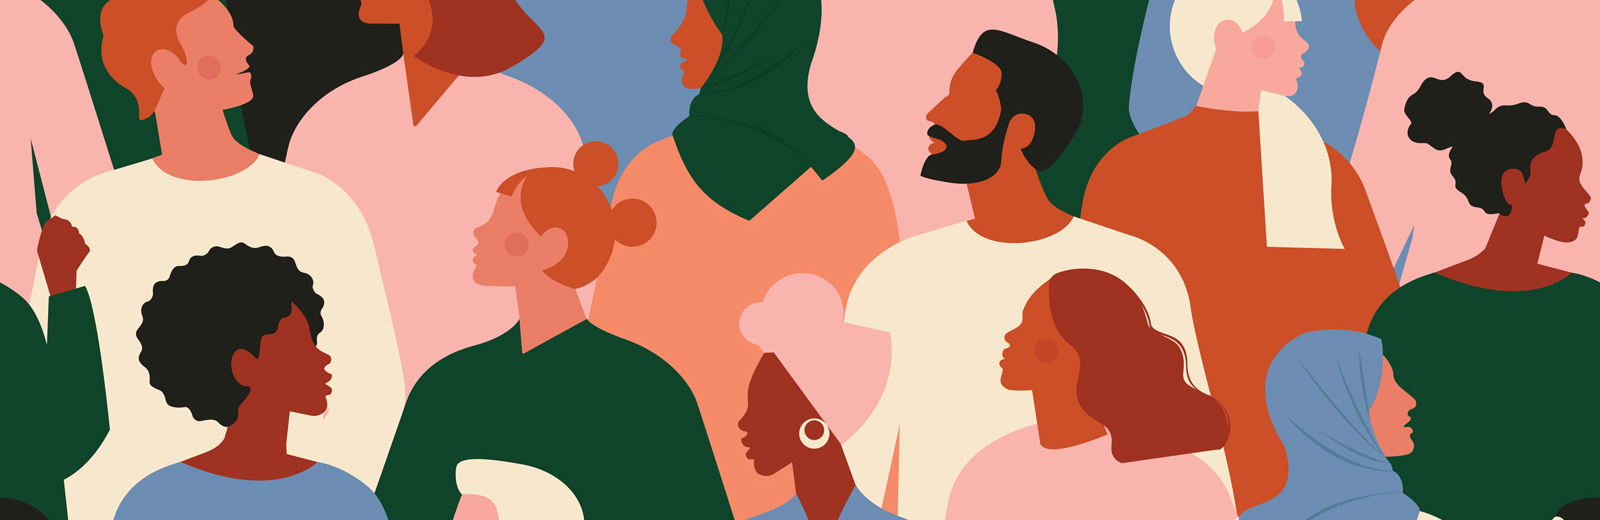 Diverse crowd of people illustration